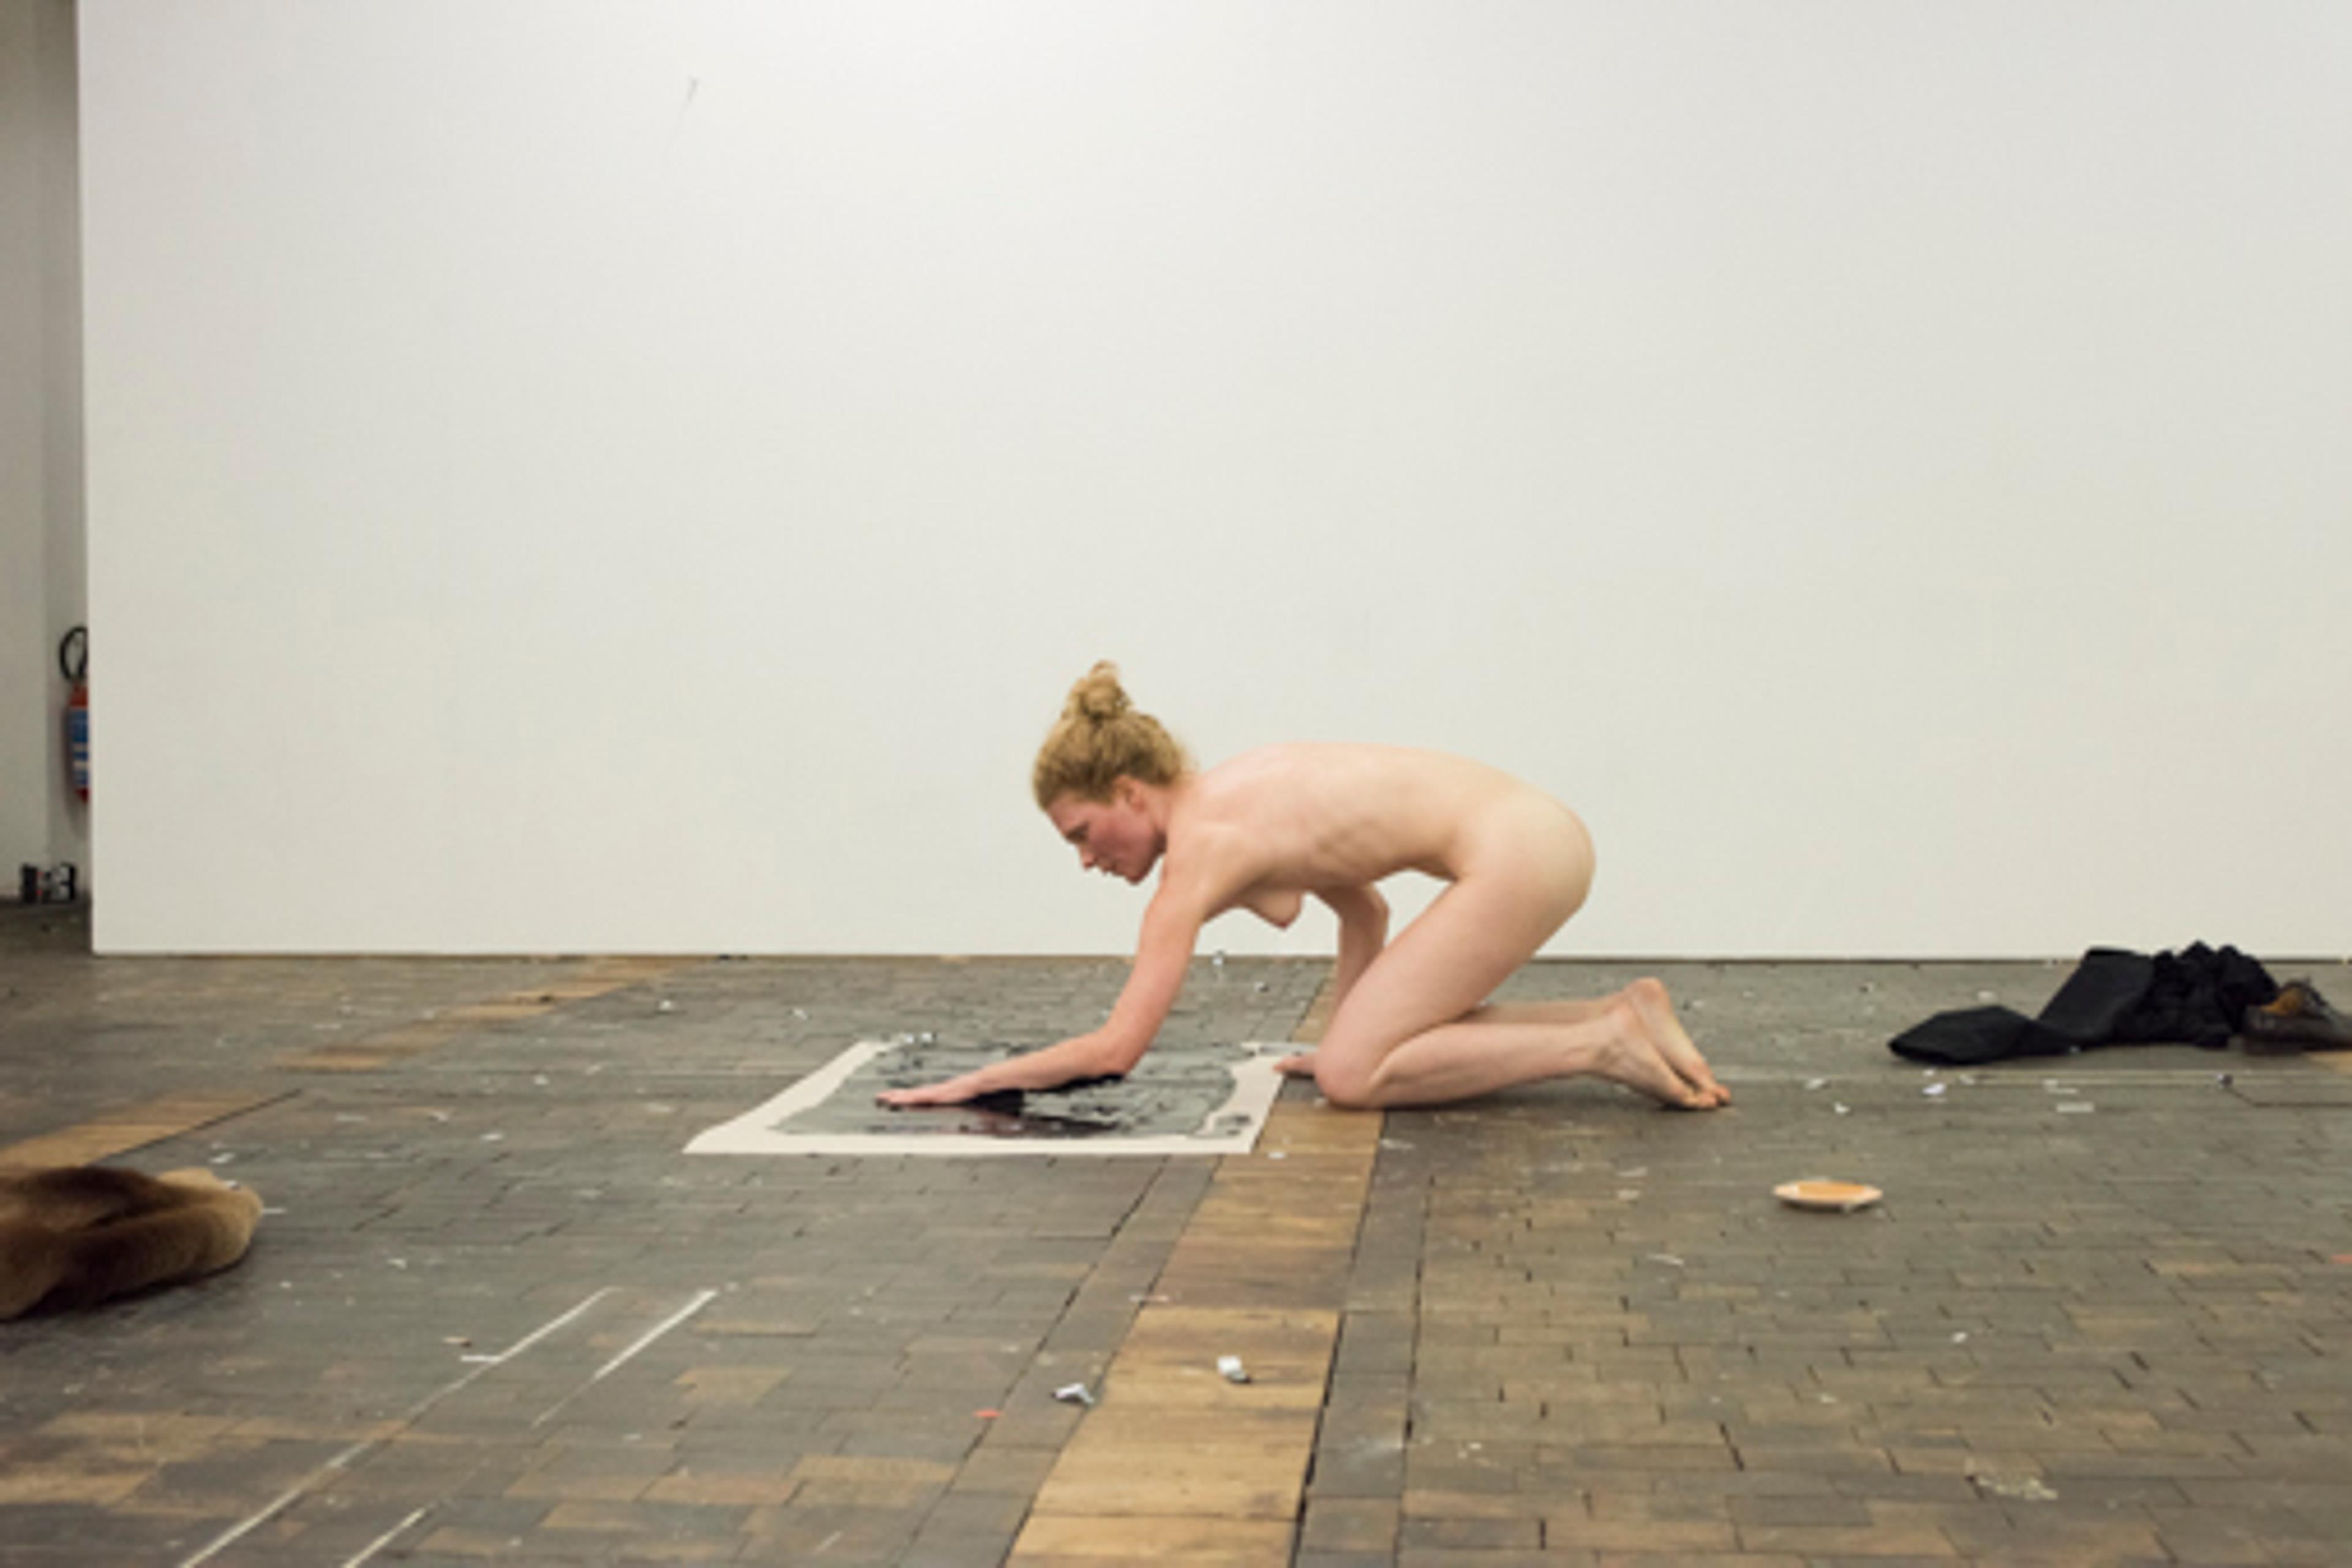 Gisela Hochuli, «In Touch with M.O. – eine Auslese», 2014 / Photo credit: Swiss Performance Art Award 2014